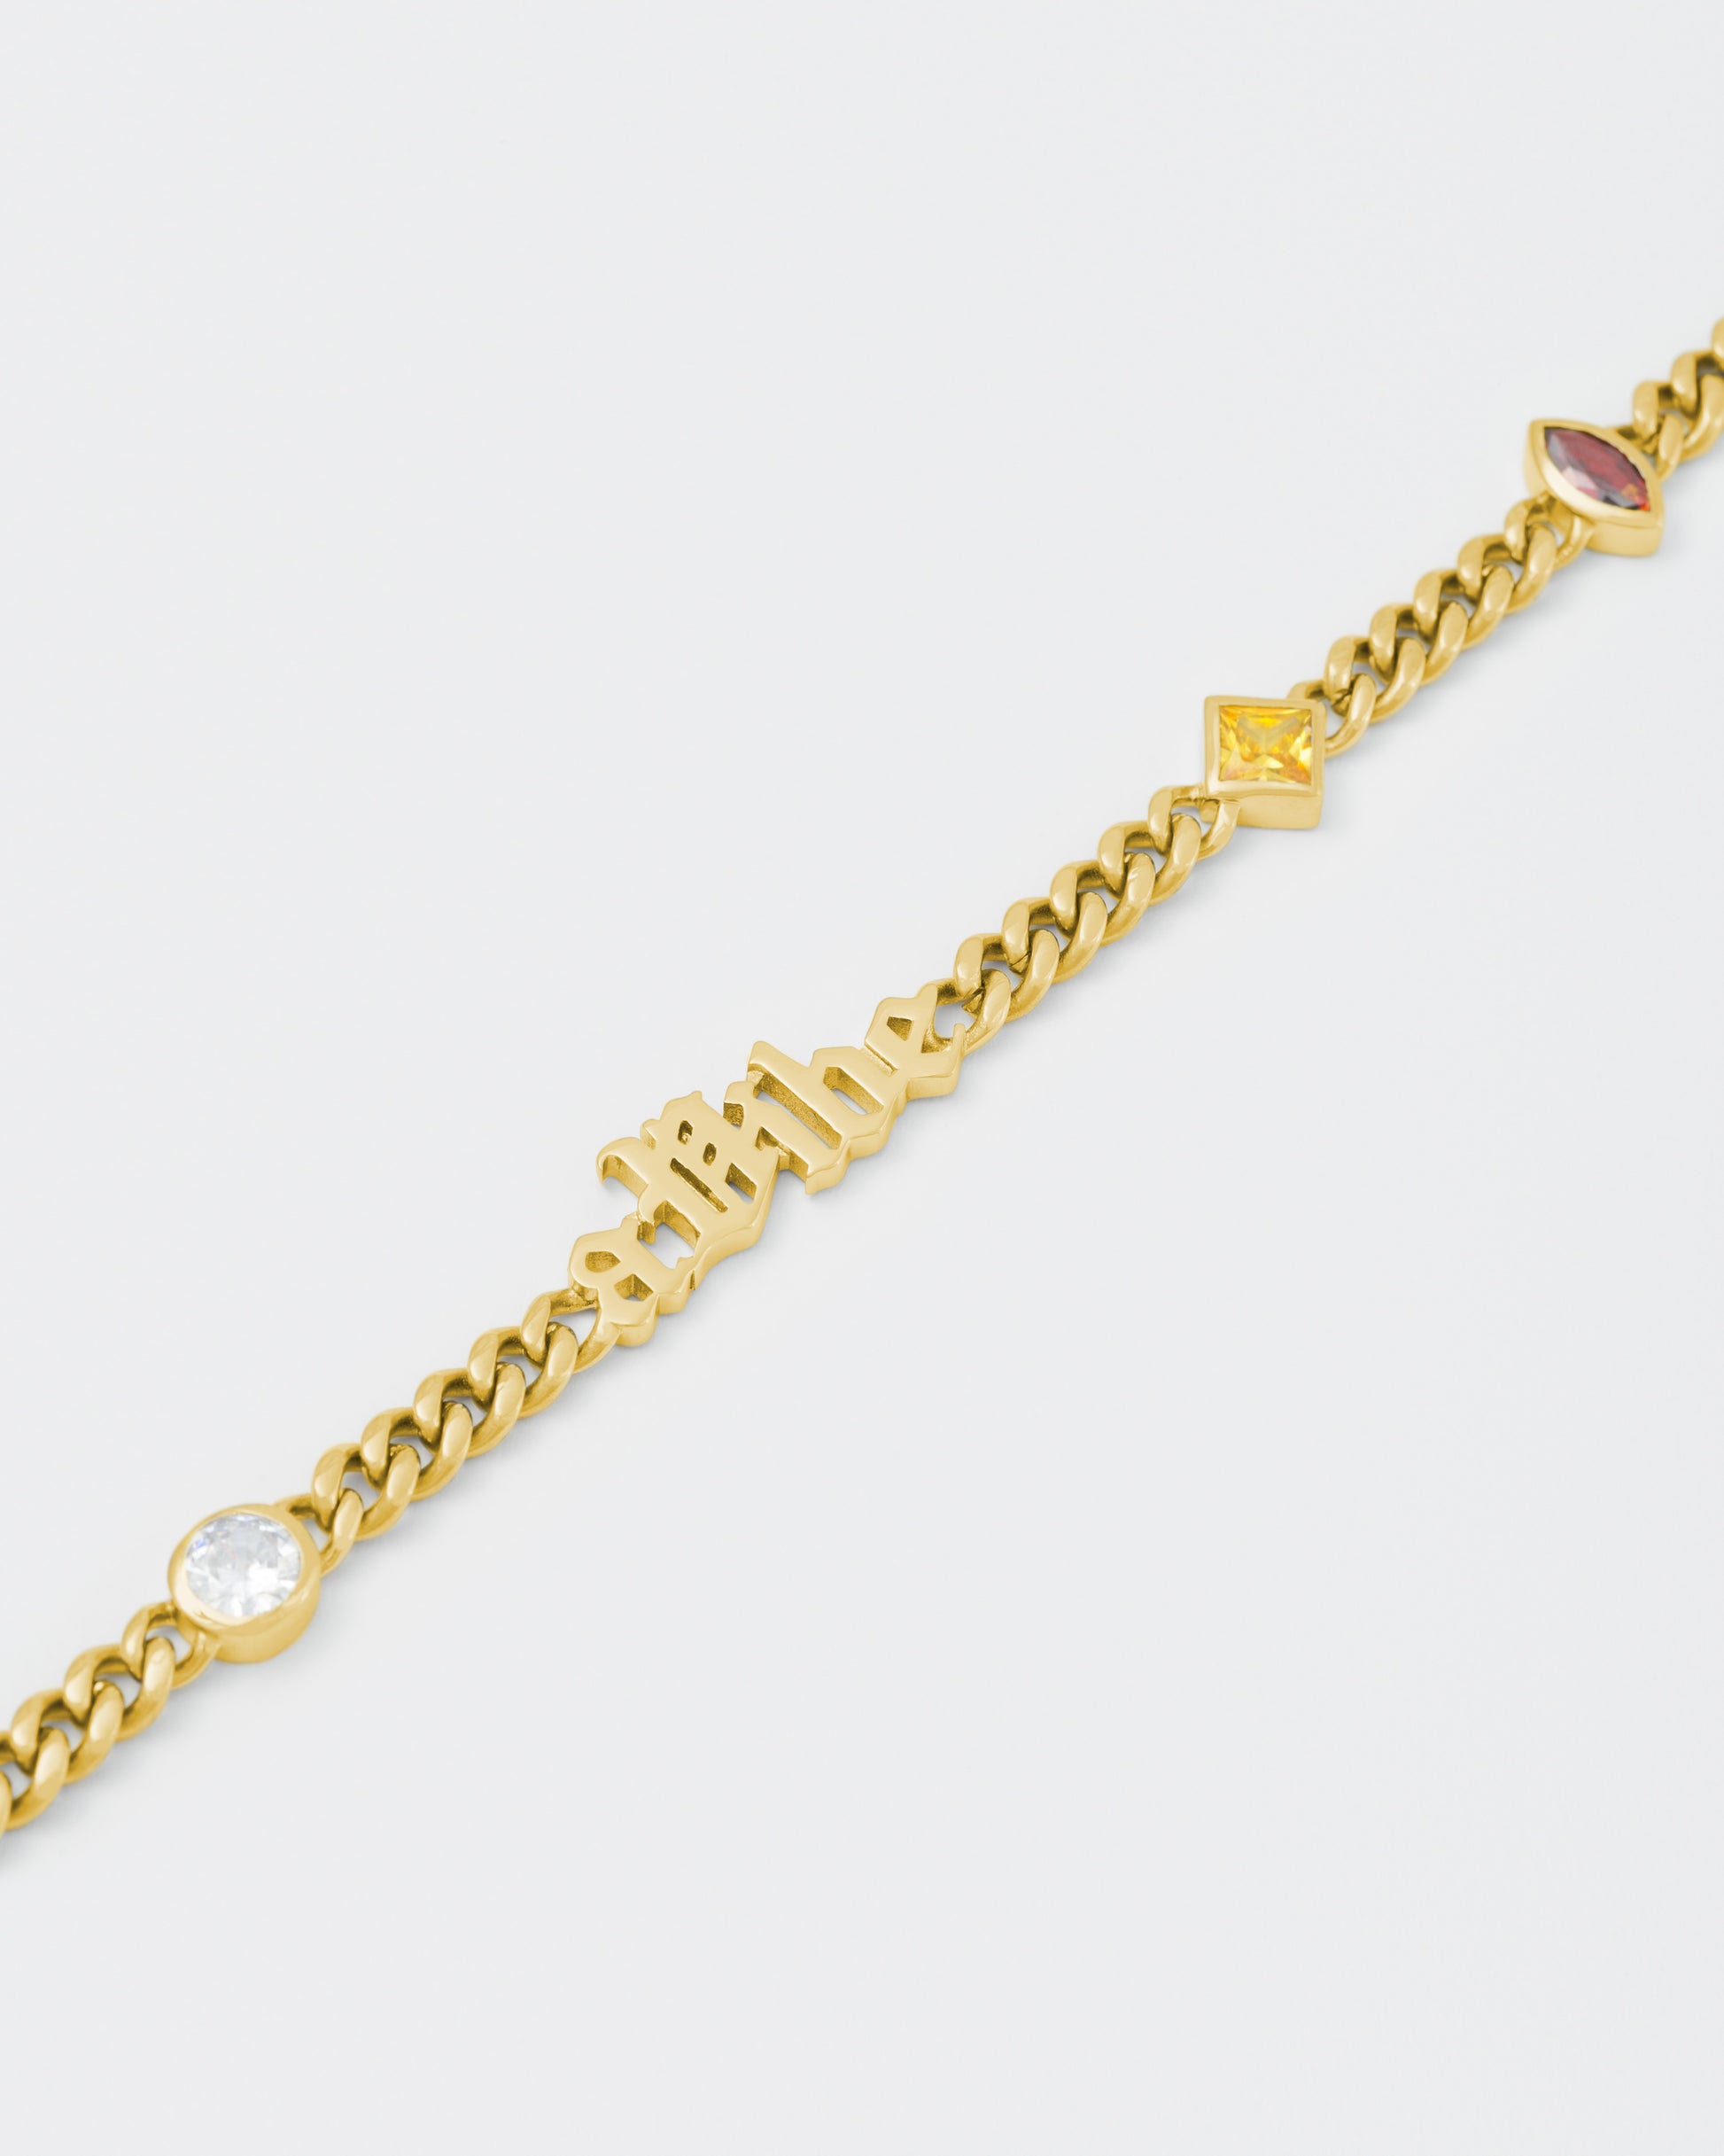 detail of A Vibe cuban chain bracelet with 18kt yellow gold coating, mixed shape bezel stones in diamond white, yellow, garnet, tanzanite and "A Vibe" central metal tag. Lobster clasp with logo